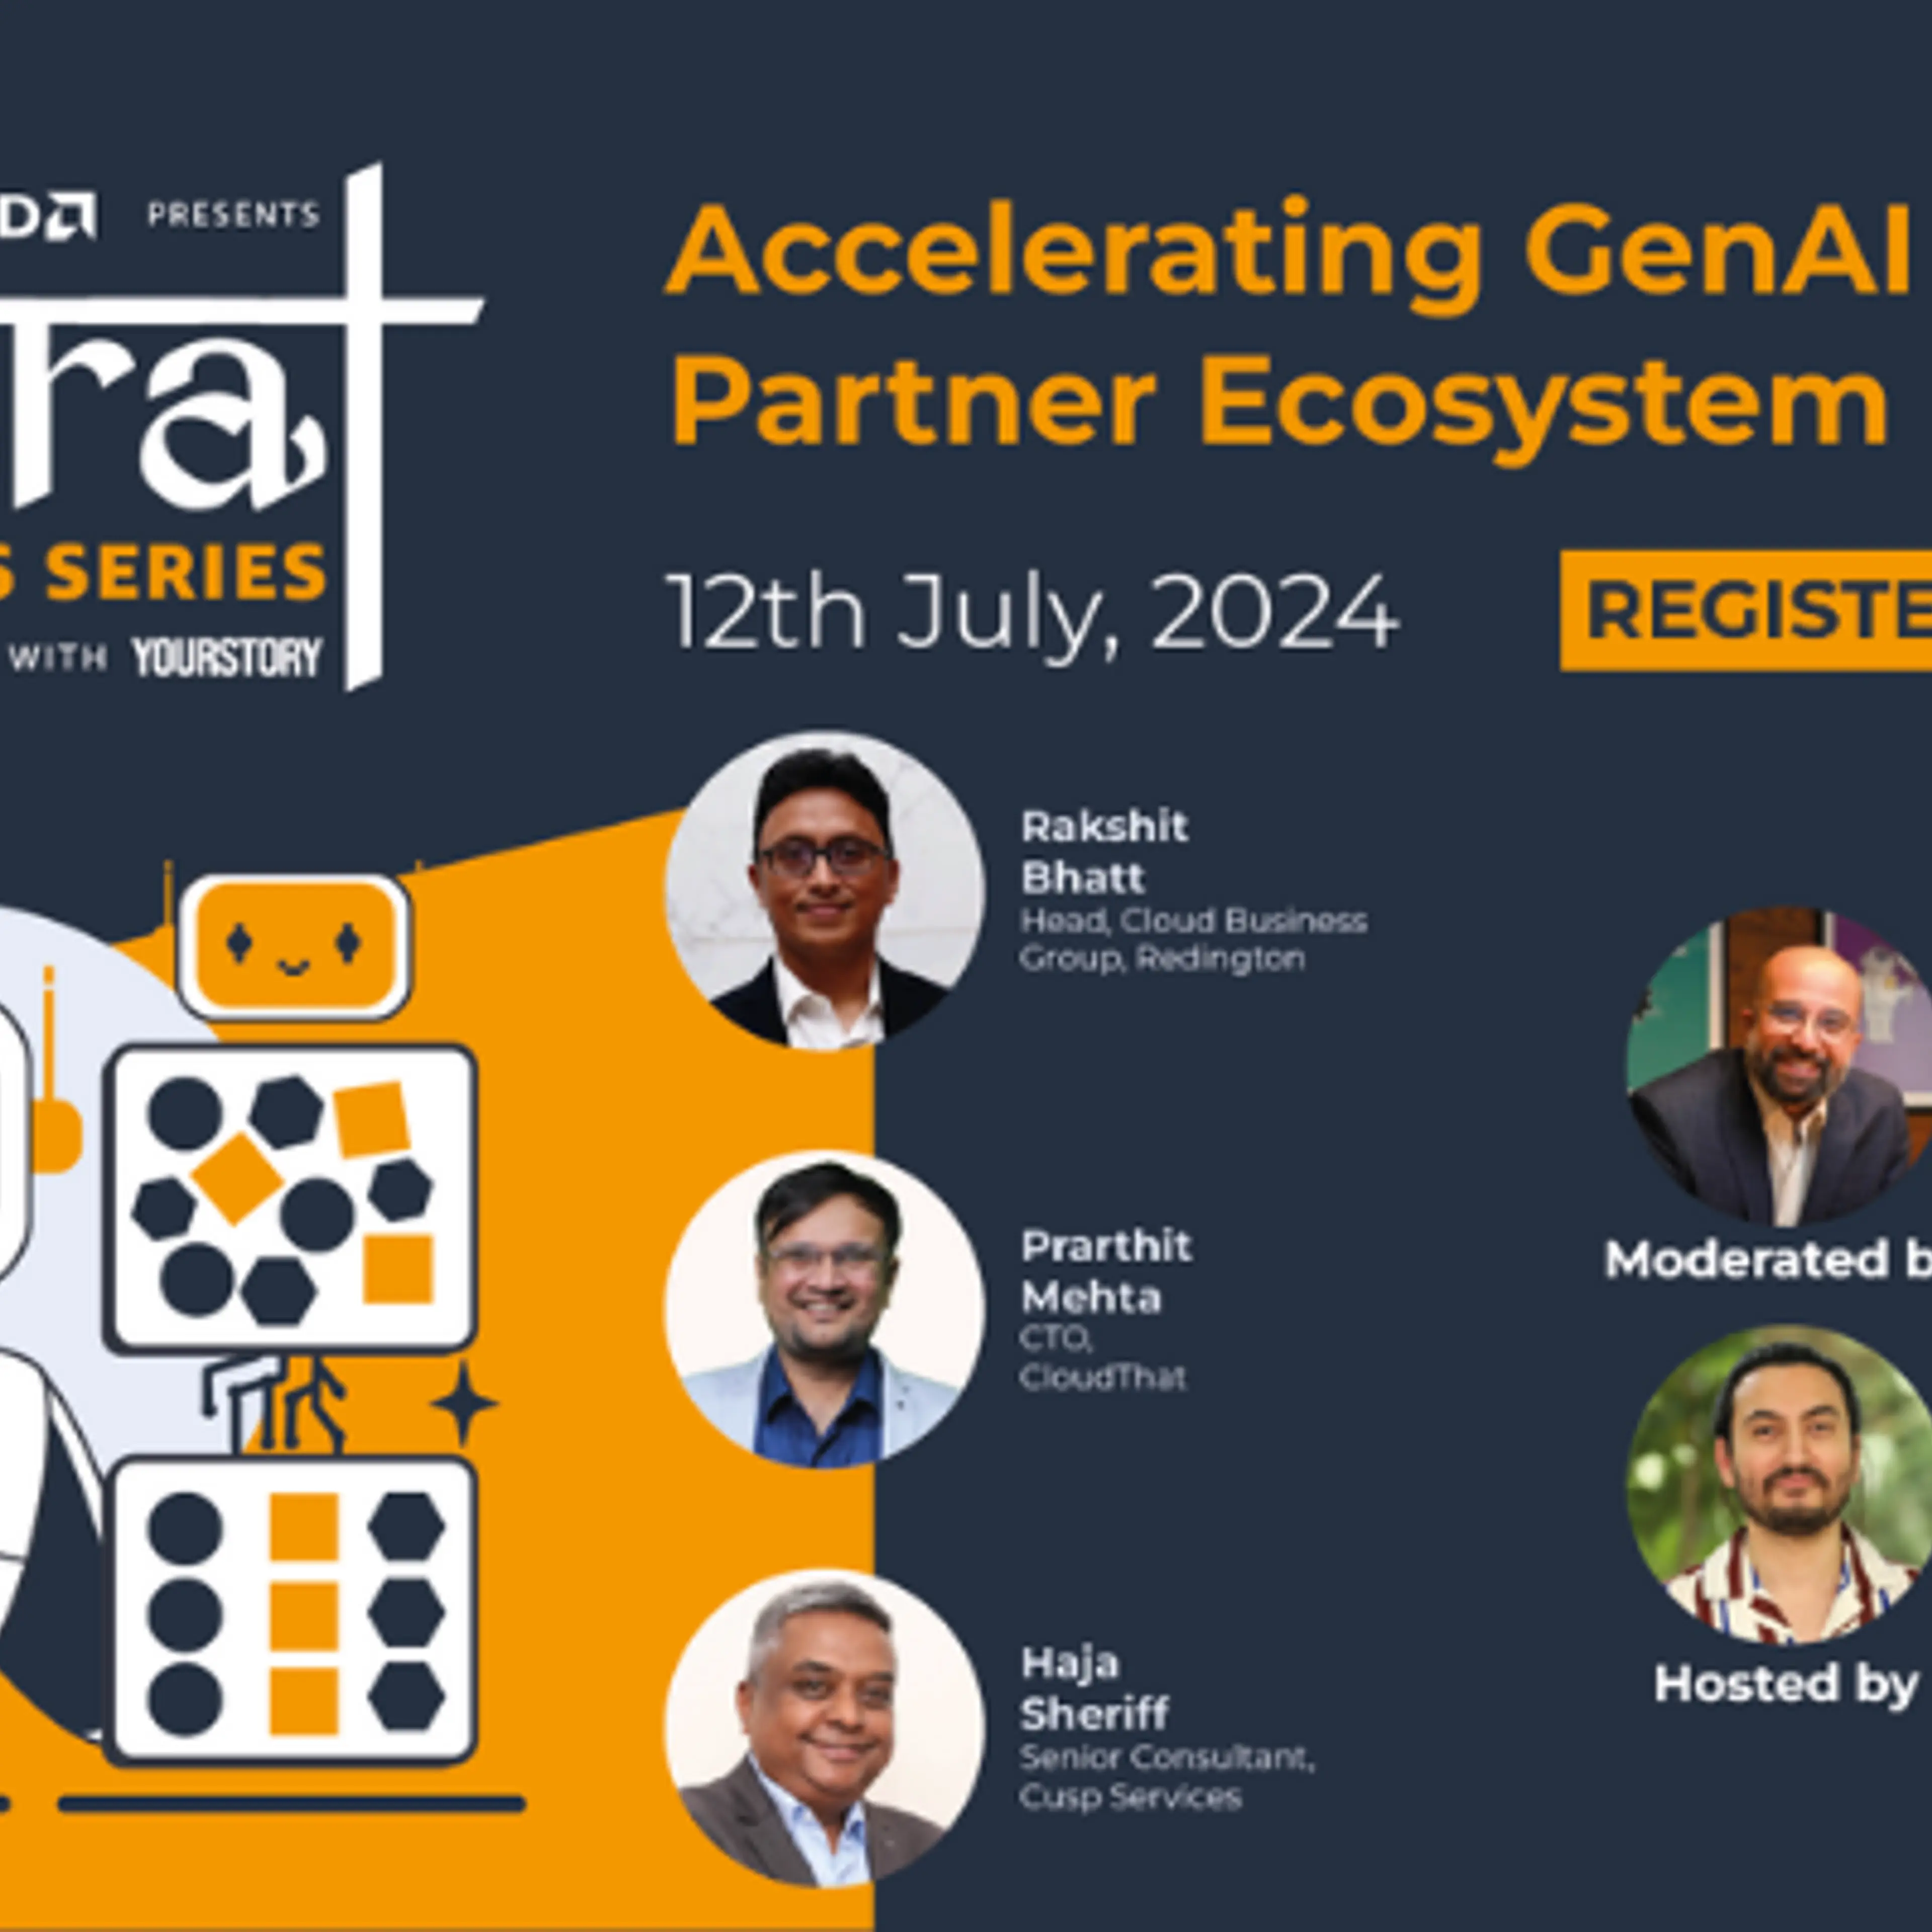 Generative AI in the partner ecosystem: Experts to discuss strategies at AWS Bharat Innovators’ webinar